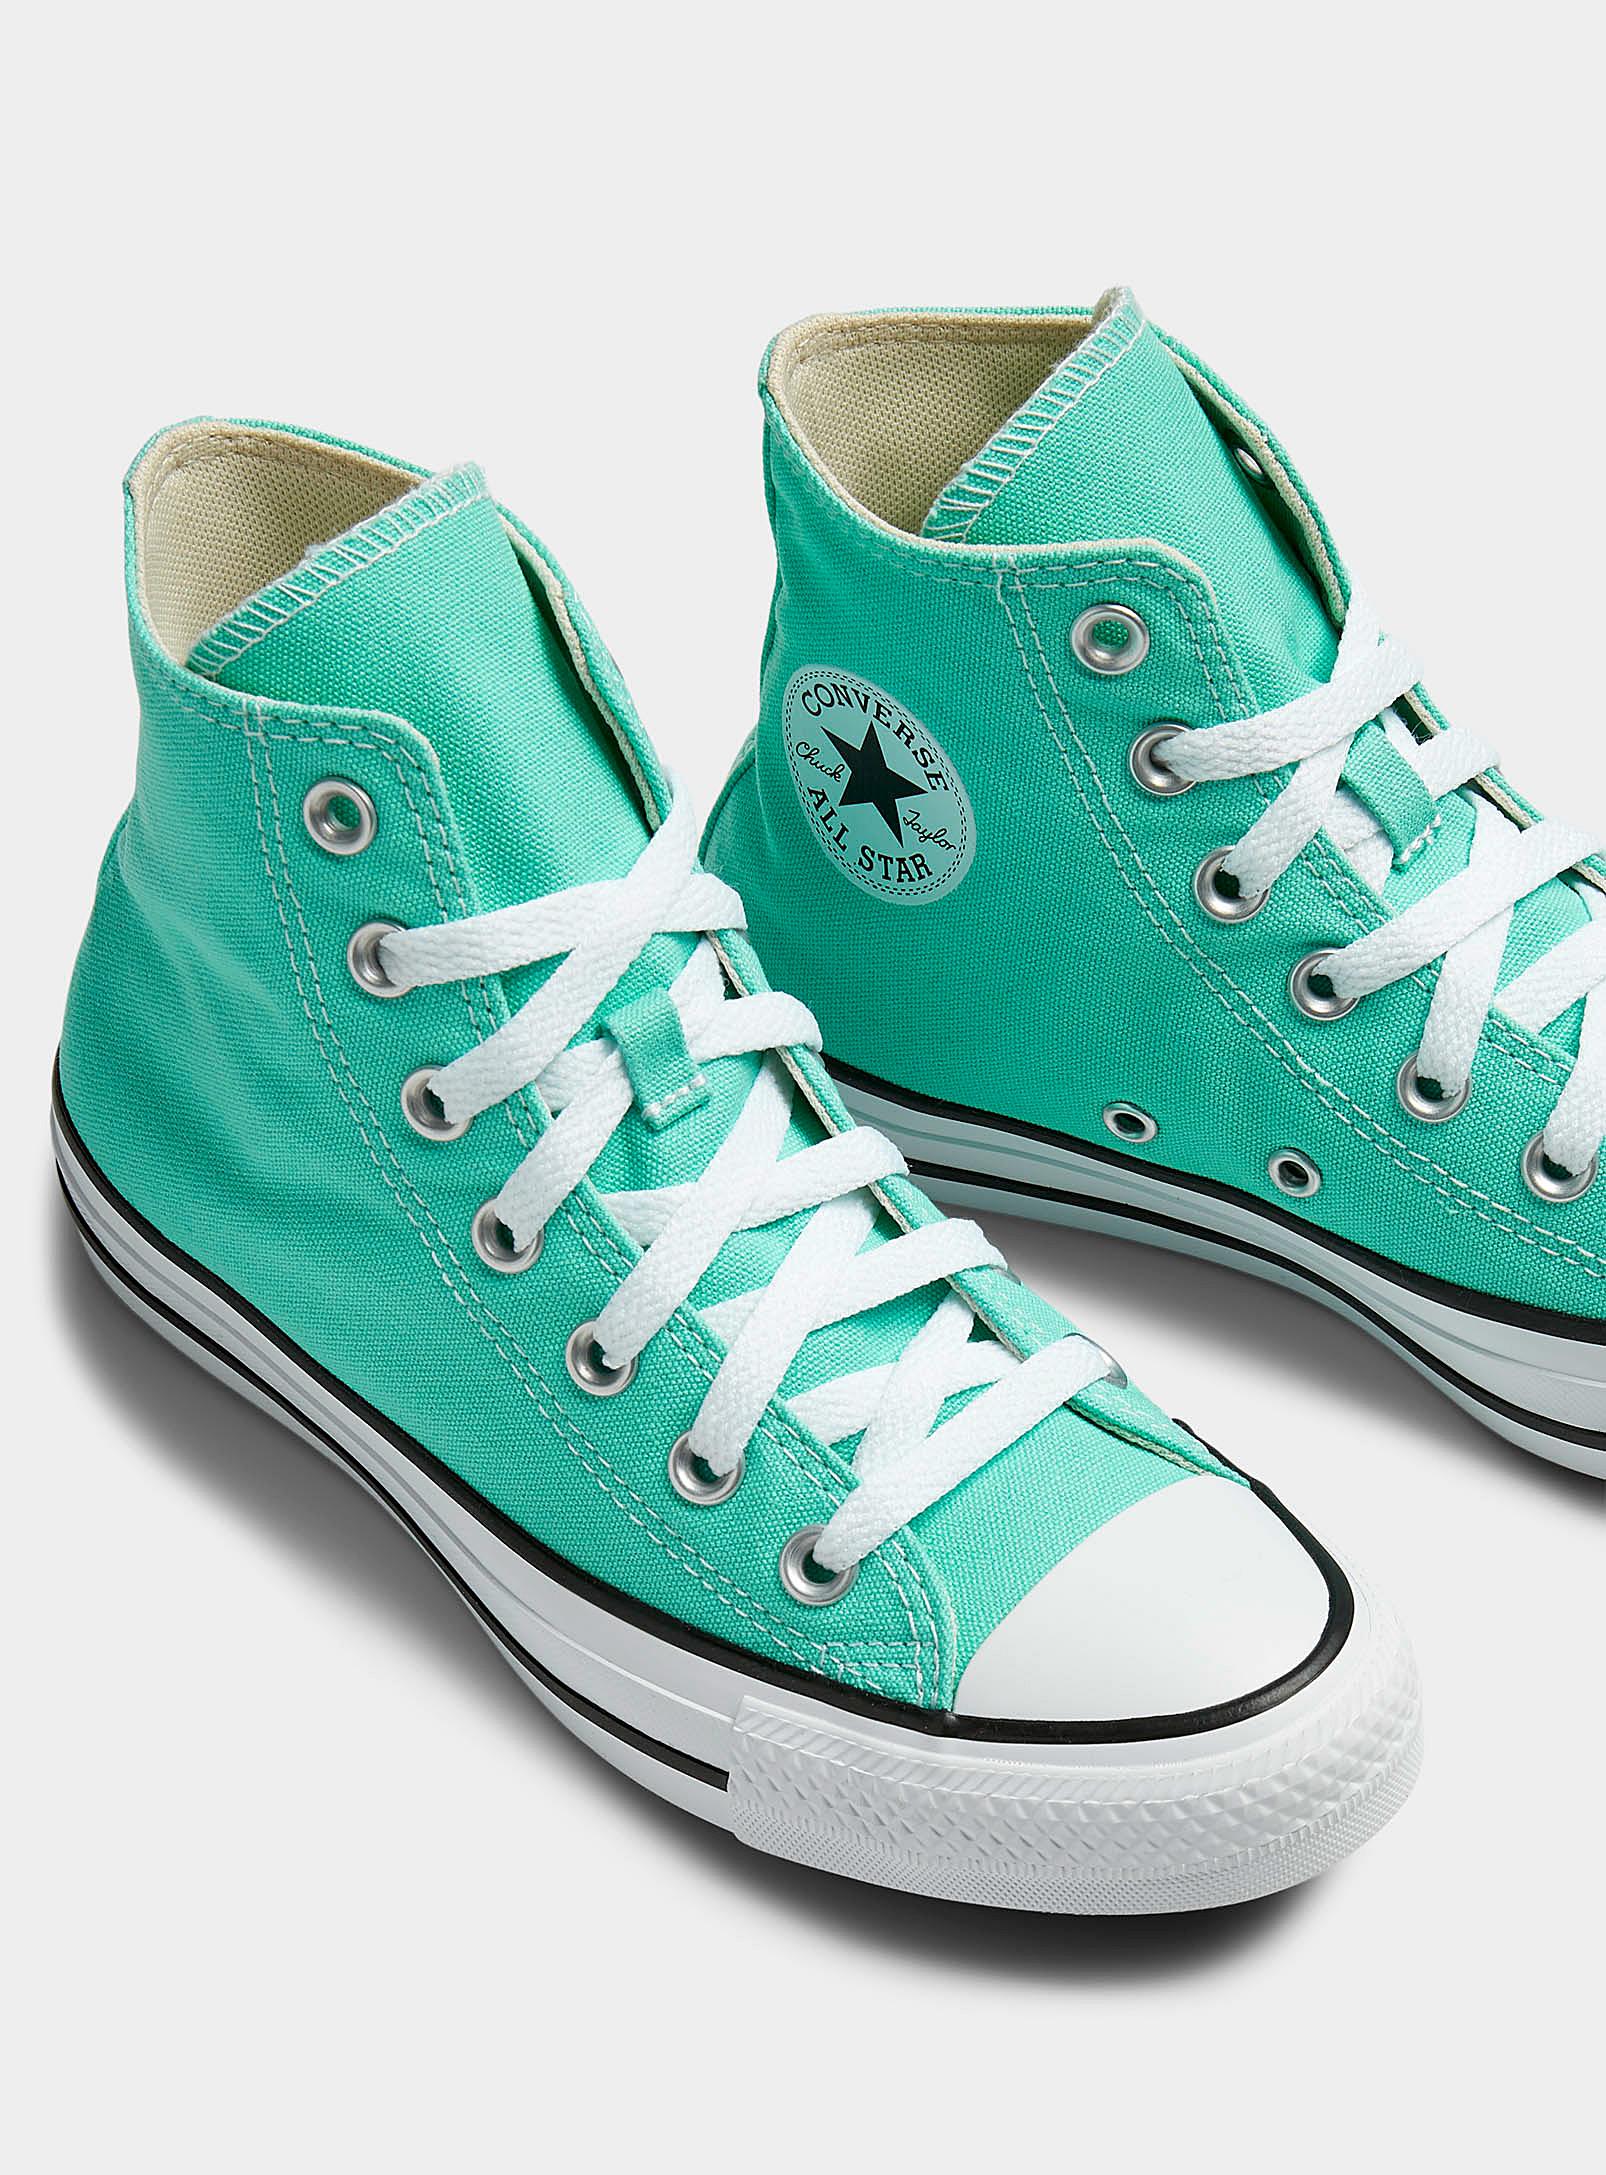 Converse Chuck Taylor All Star High Top Cyber Teal Sneakers Women in Green  | Lyst